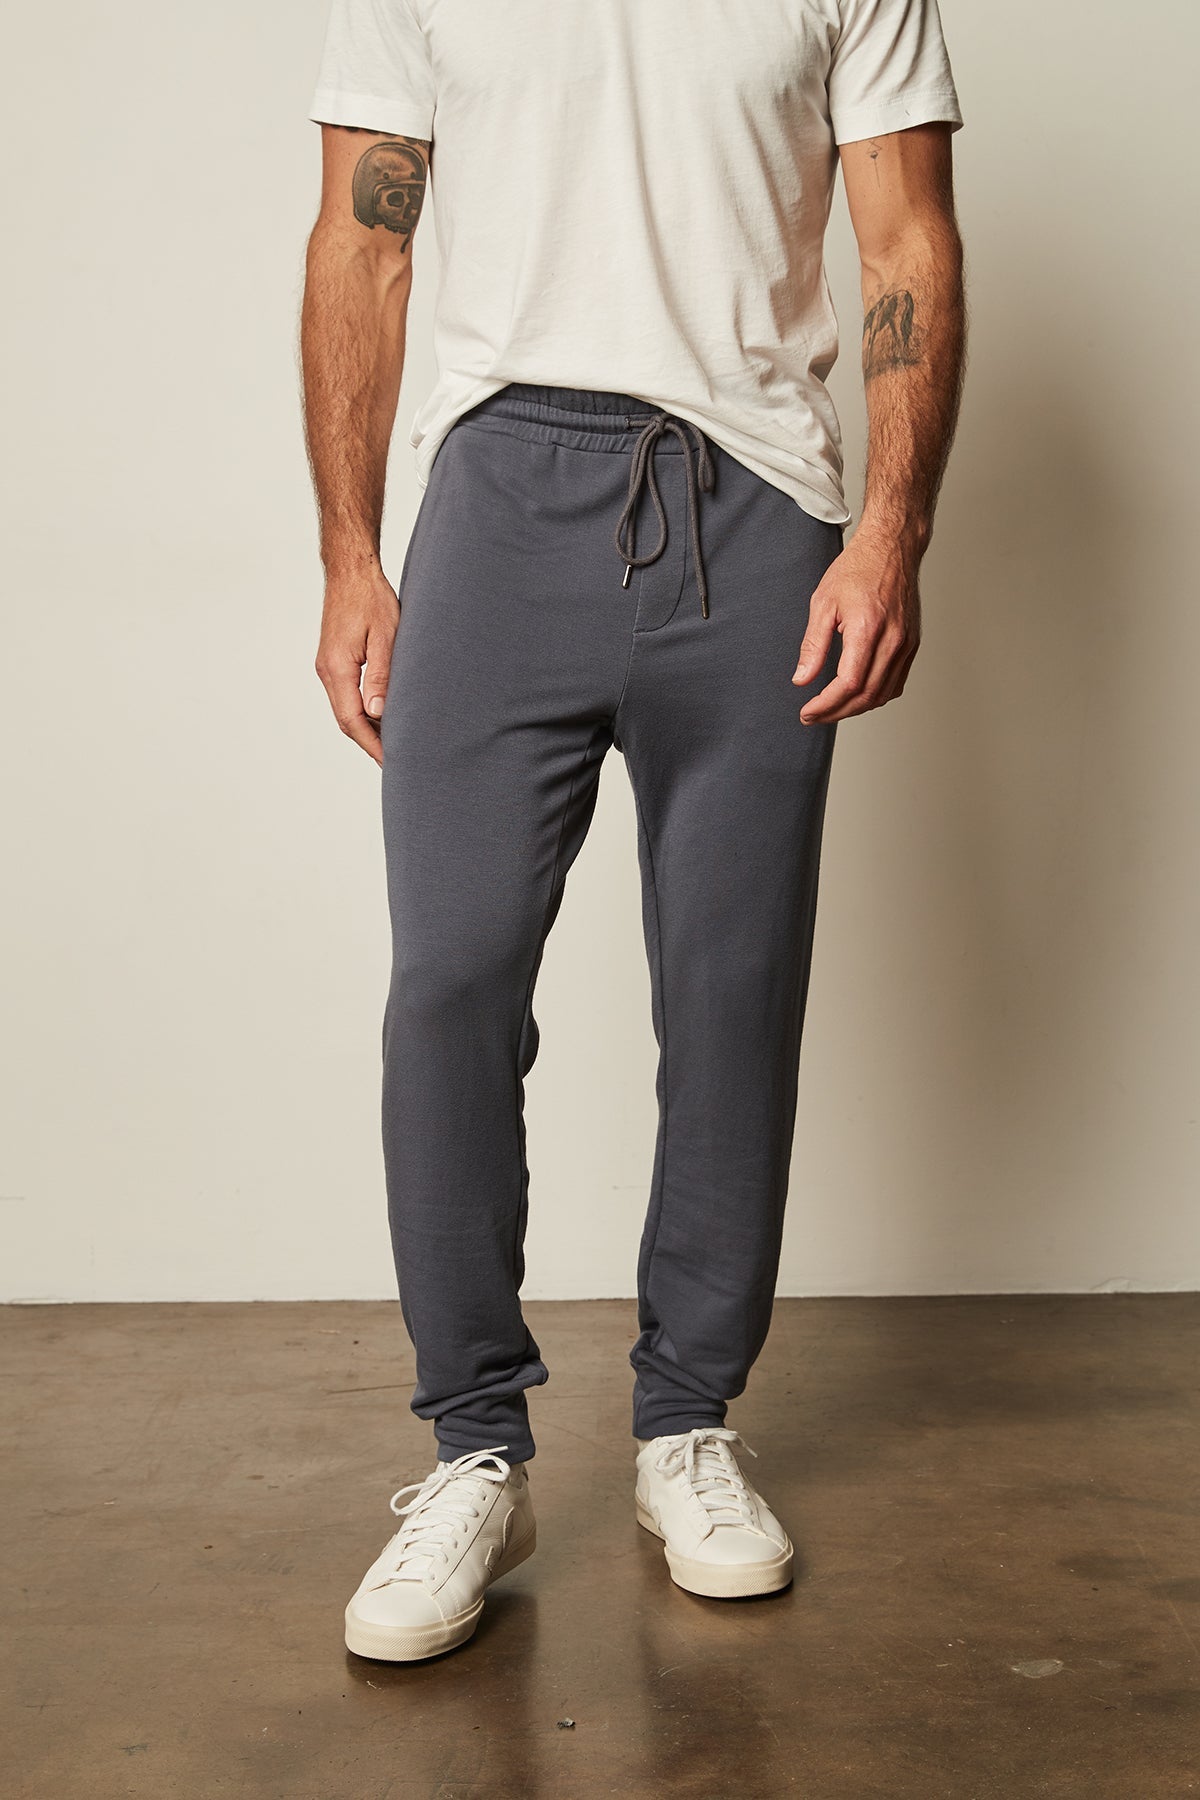   A man wearing Crosby Luxe Fleece Jogger sweatpants by Velvet by Graham & Spencer and a white t-shirt for workouts. 